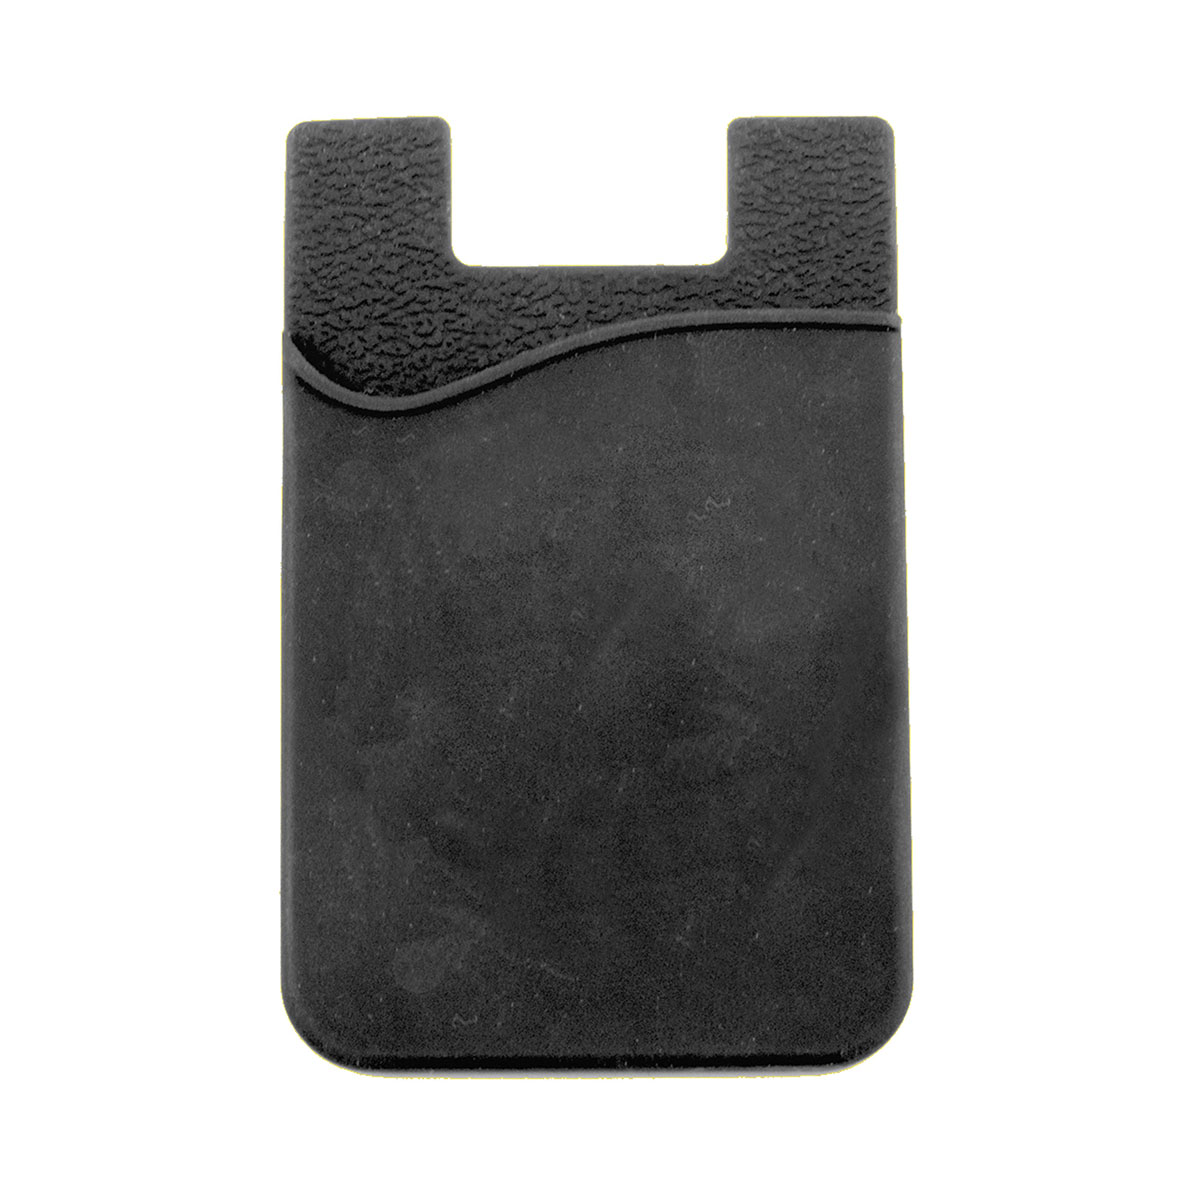 Black - Back in Stock 01/31/23 Silicone Smart Wallet